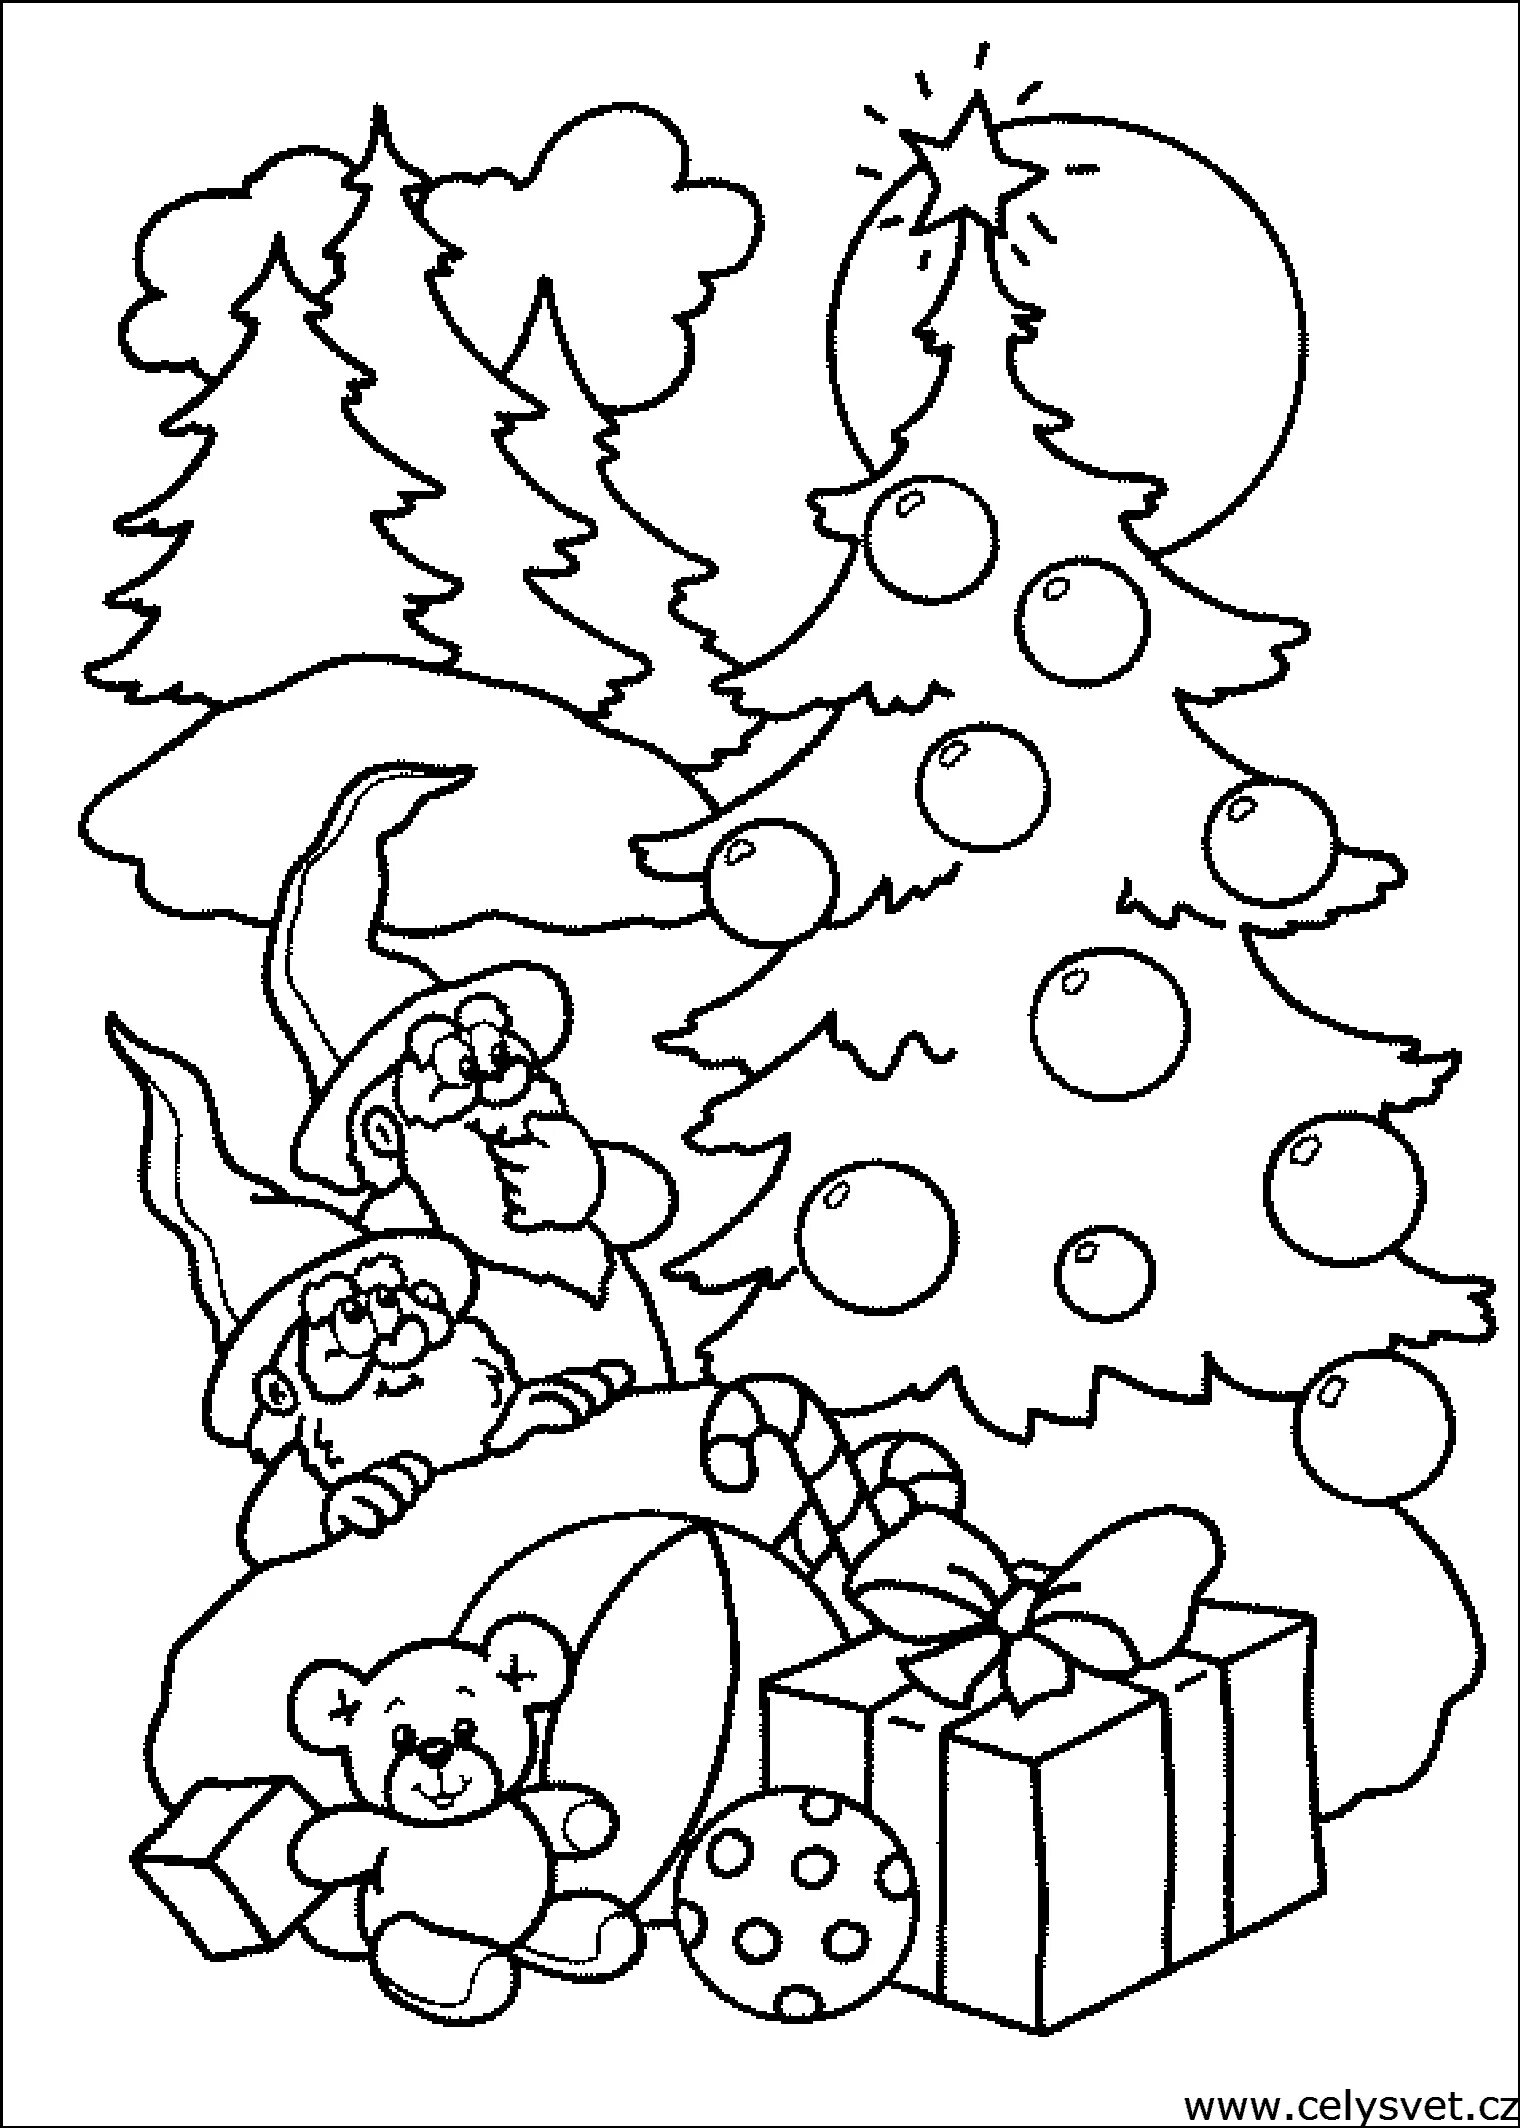 Outstanding Christmas coloring book